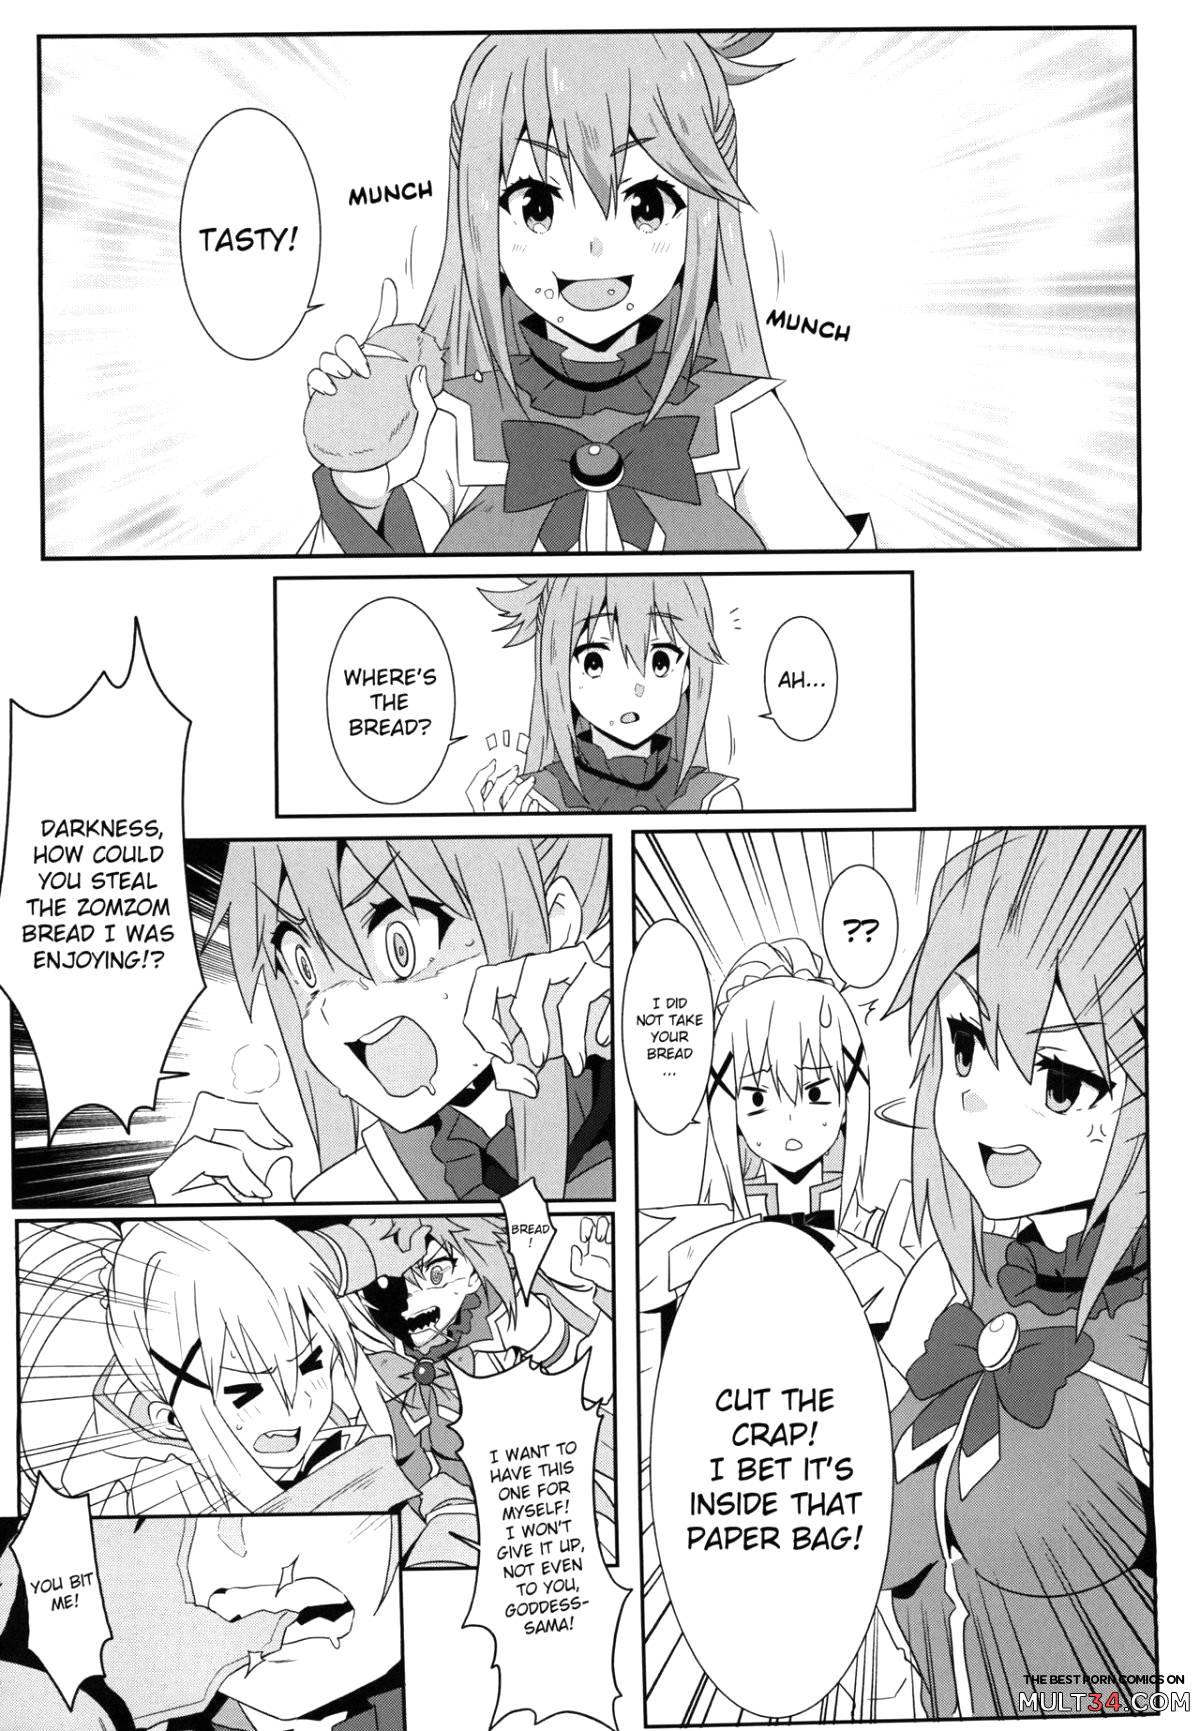 Blessing Megumin with a Magnificence Explosion! 4 page 6